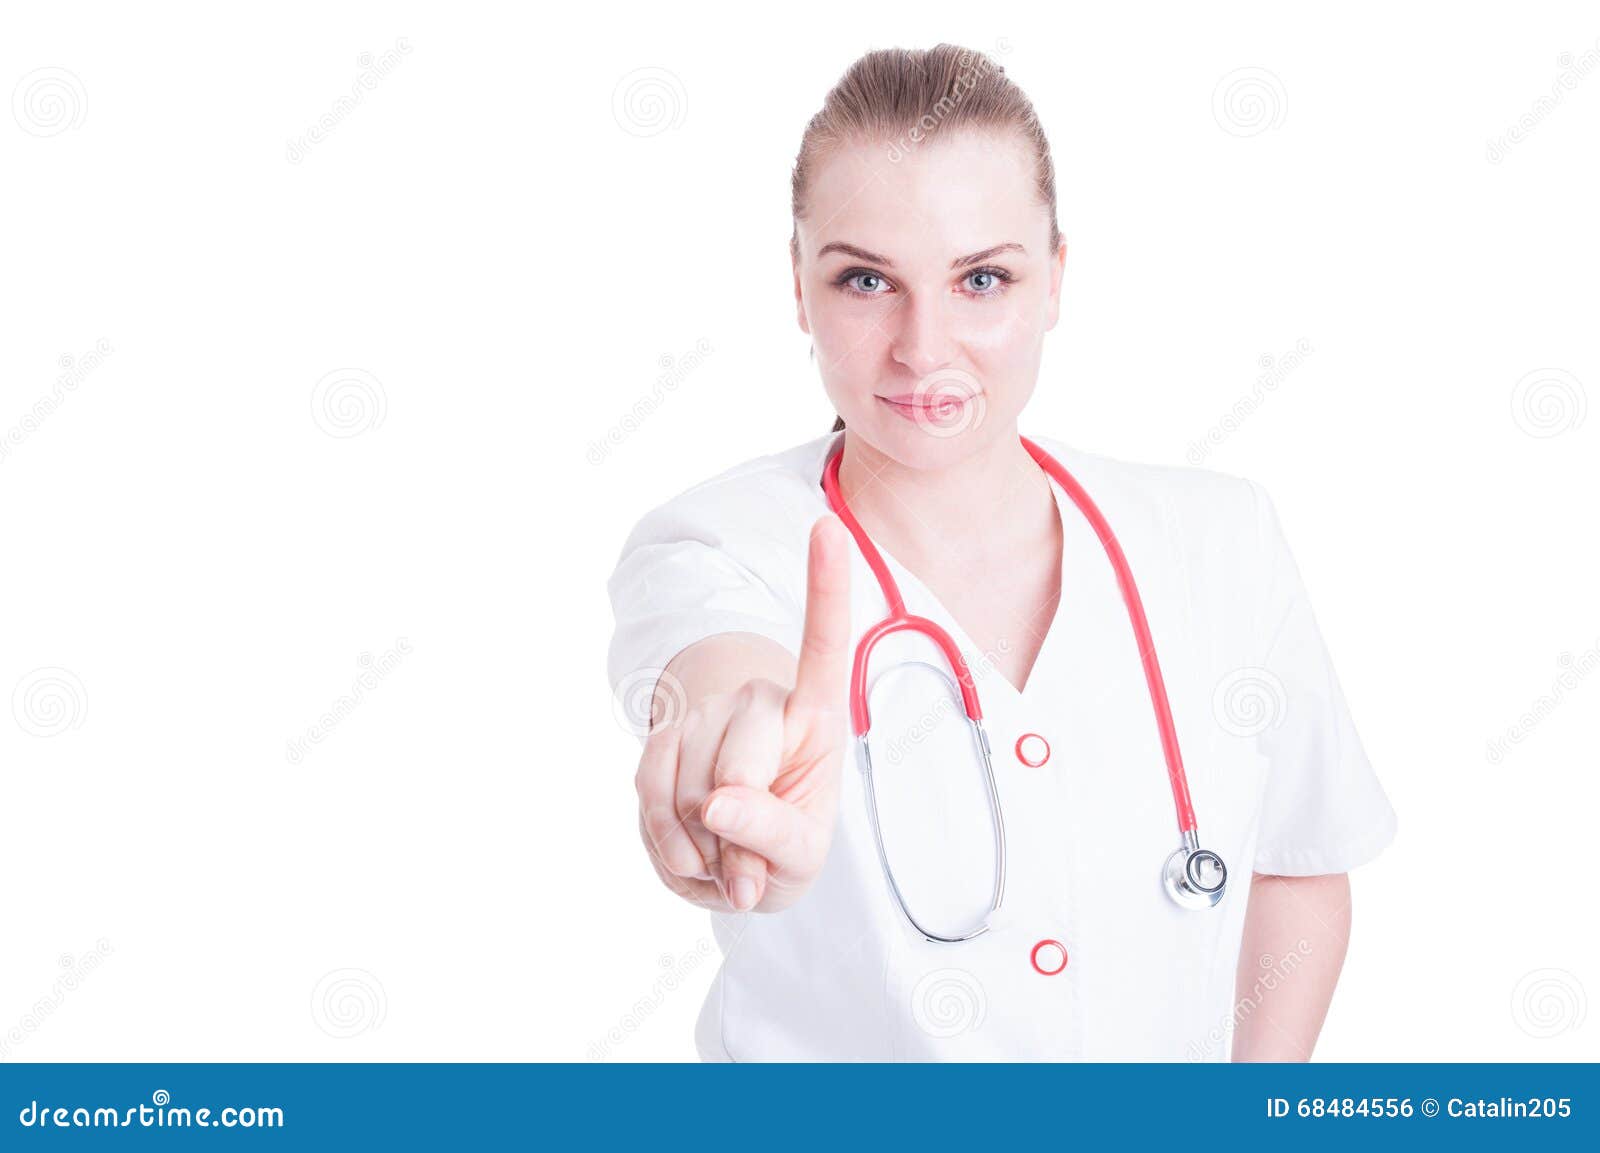 portrait-female-doctor-perfect-skin-holding-one-finger-up-smiling-copyspace-advertising-area-68484556.jpg